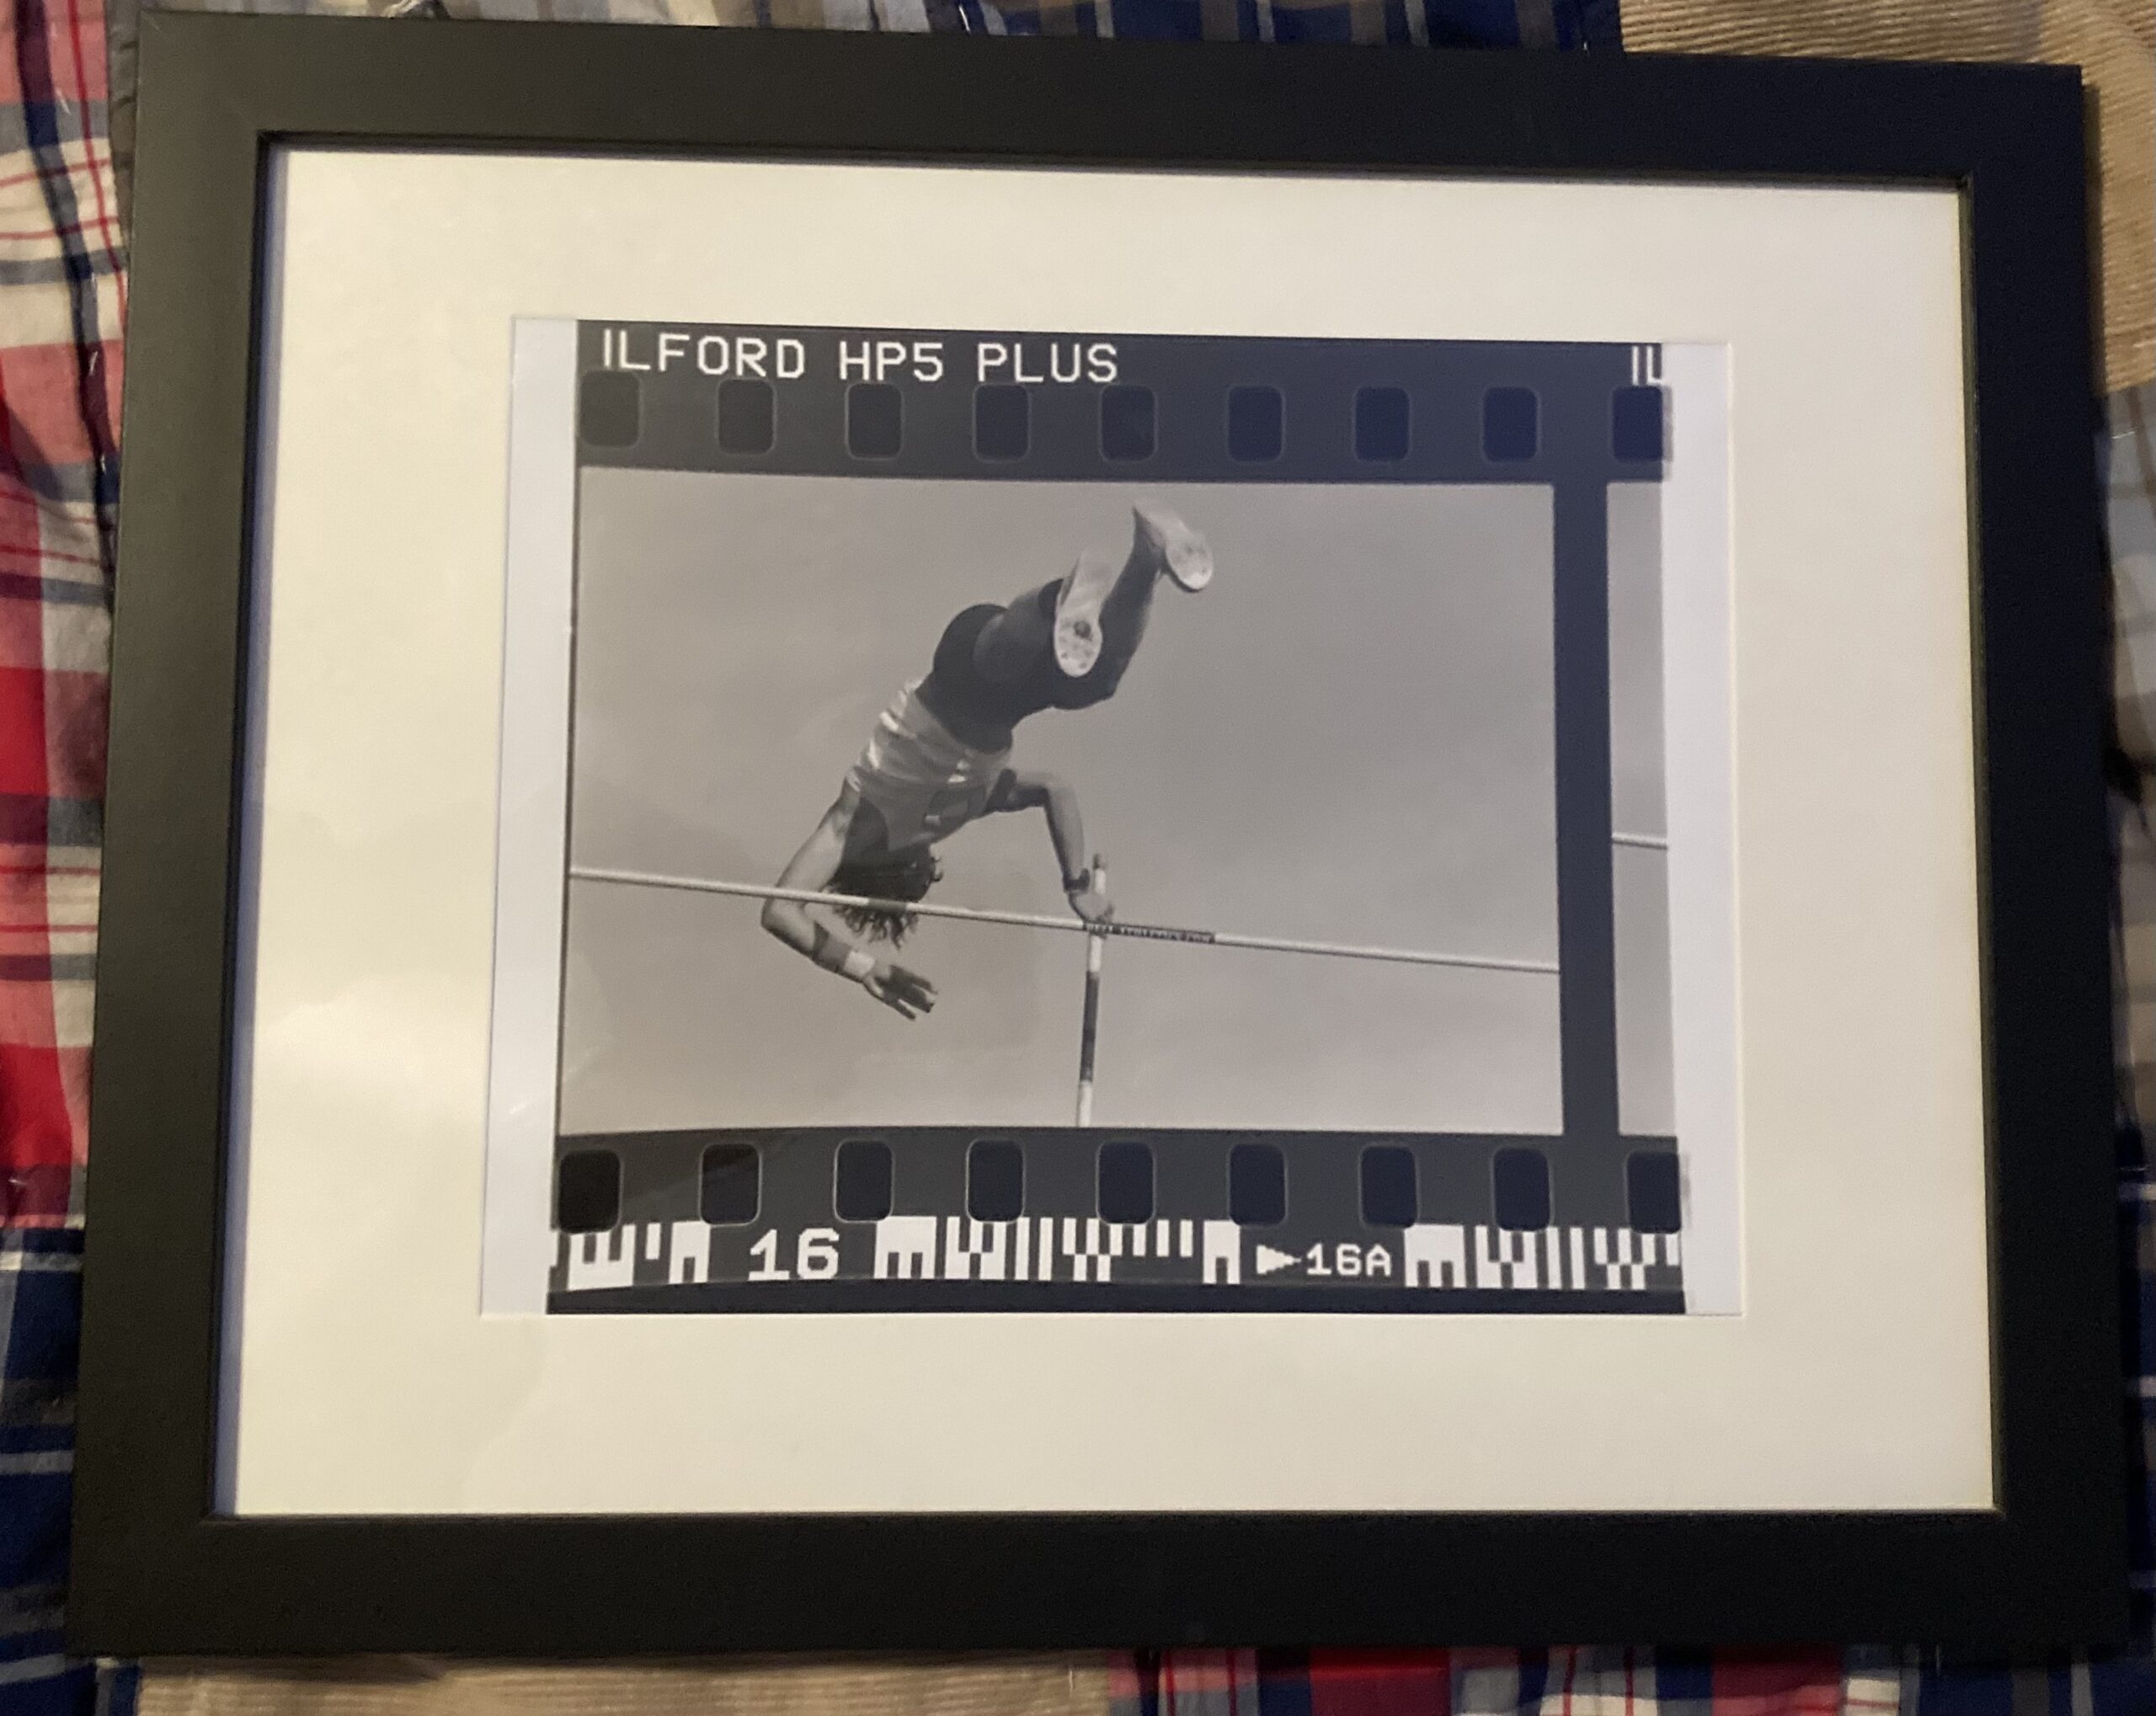 @bsanfordjr Replying to @ILFORDPhoto Captured my son pole vaulting using HP5 Plus. Then made a print on Ilford MGRC 8x10 glossy and using the Ilford multigrade dev, stop and rapid fix. The cut was between 15 and 16 (the decisive moment) so I didn't leave myself much room! #ilfordphoto #fridayfavourites #sprockets